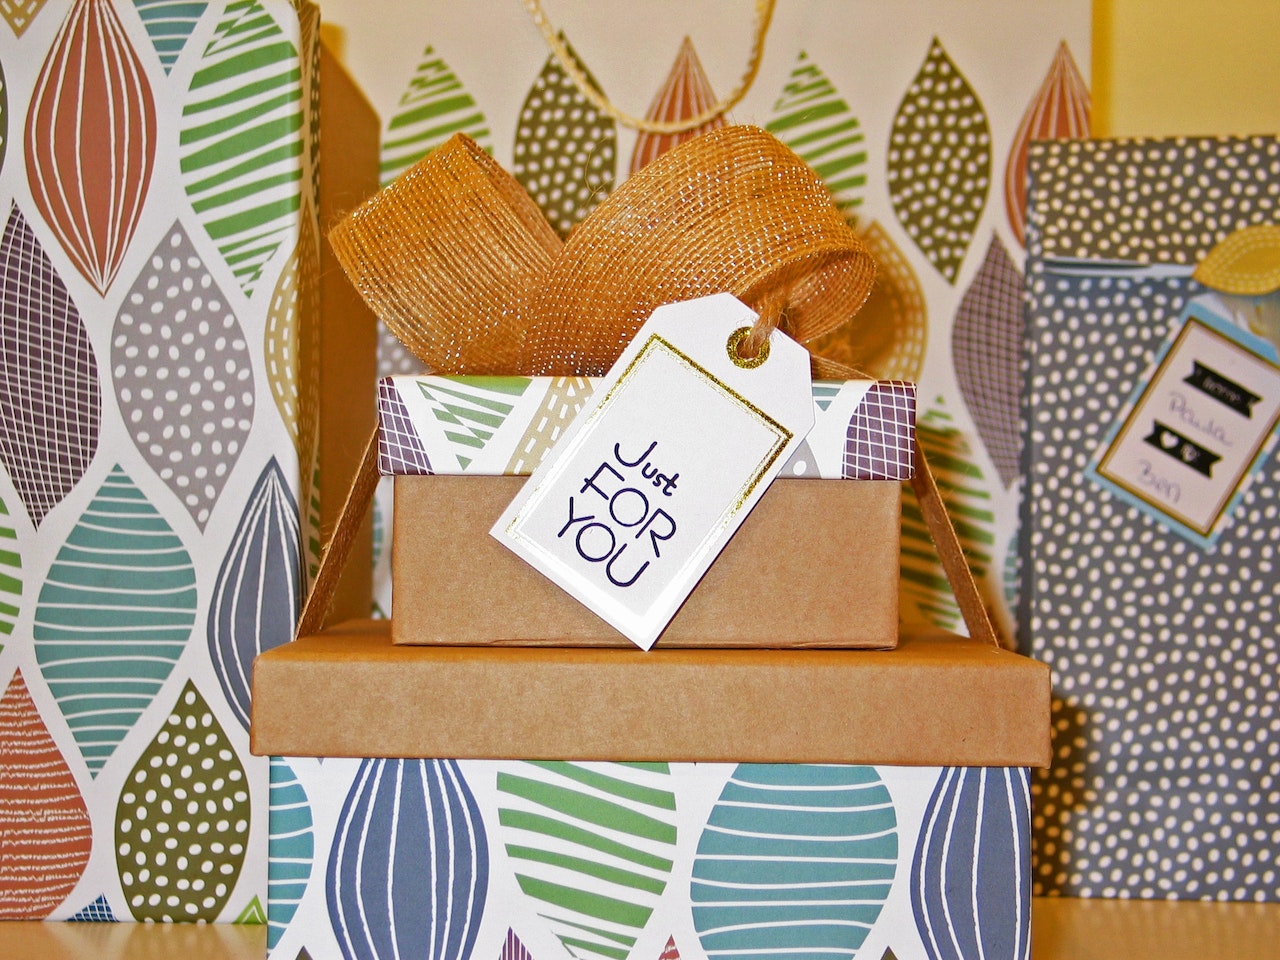  Gift Boxes with Greeting Cards